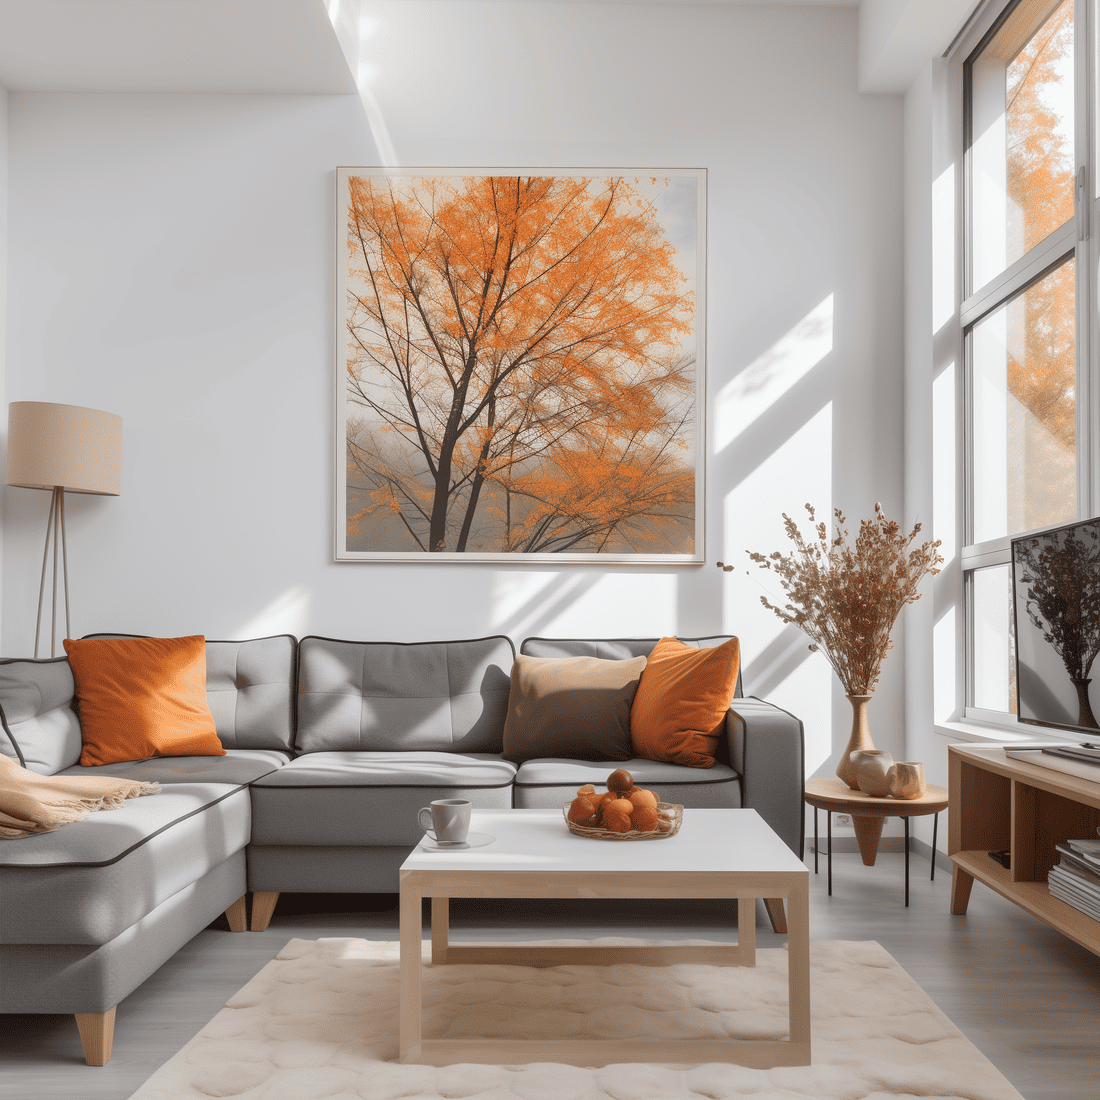 Vibrant living room with blue sofa and autumn accents.